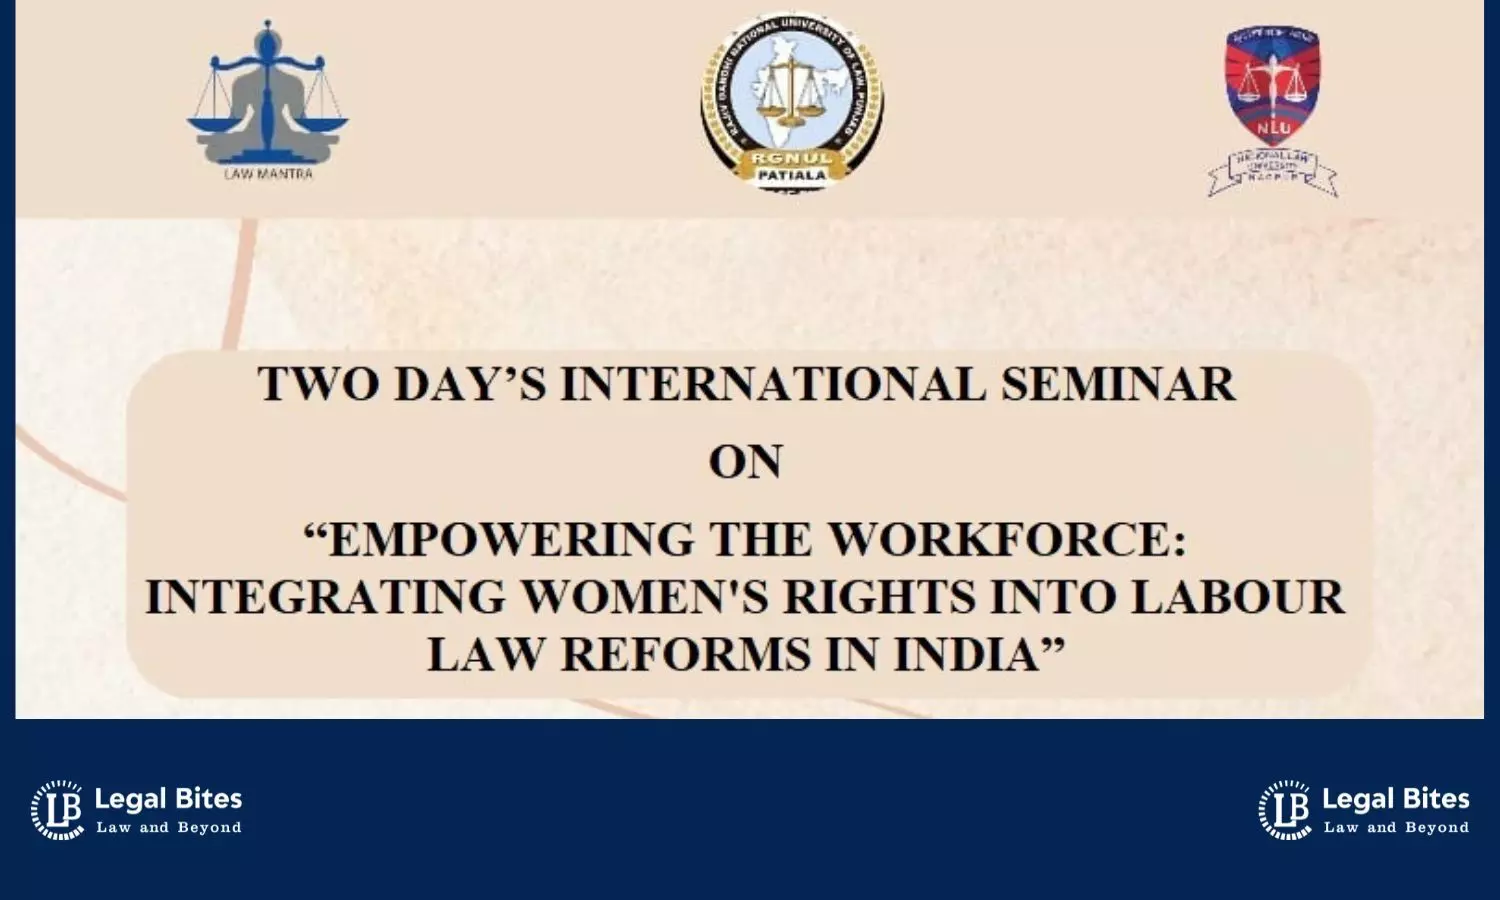 Two Day’s International Seminar on “Empowering the Workforce: Integrating Womens Rights into Labour Law Reforms in India